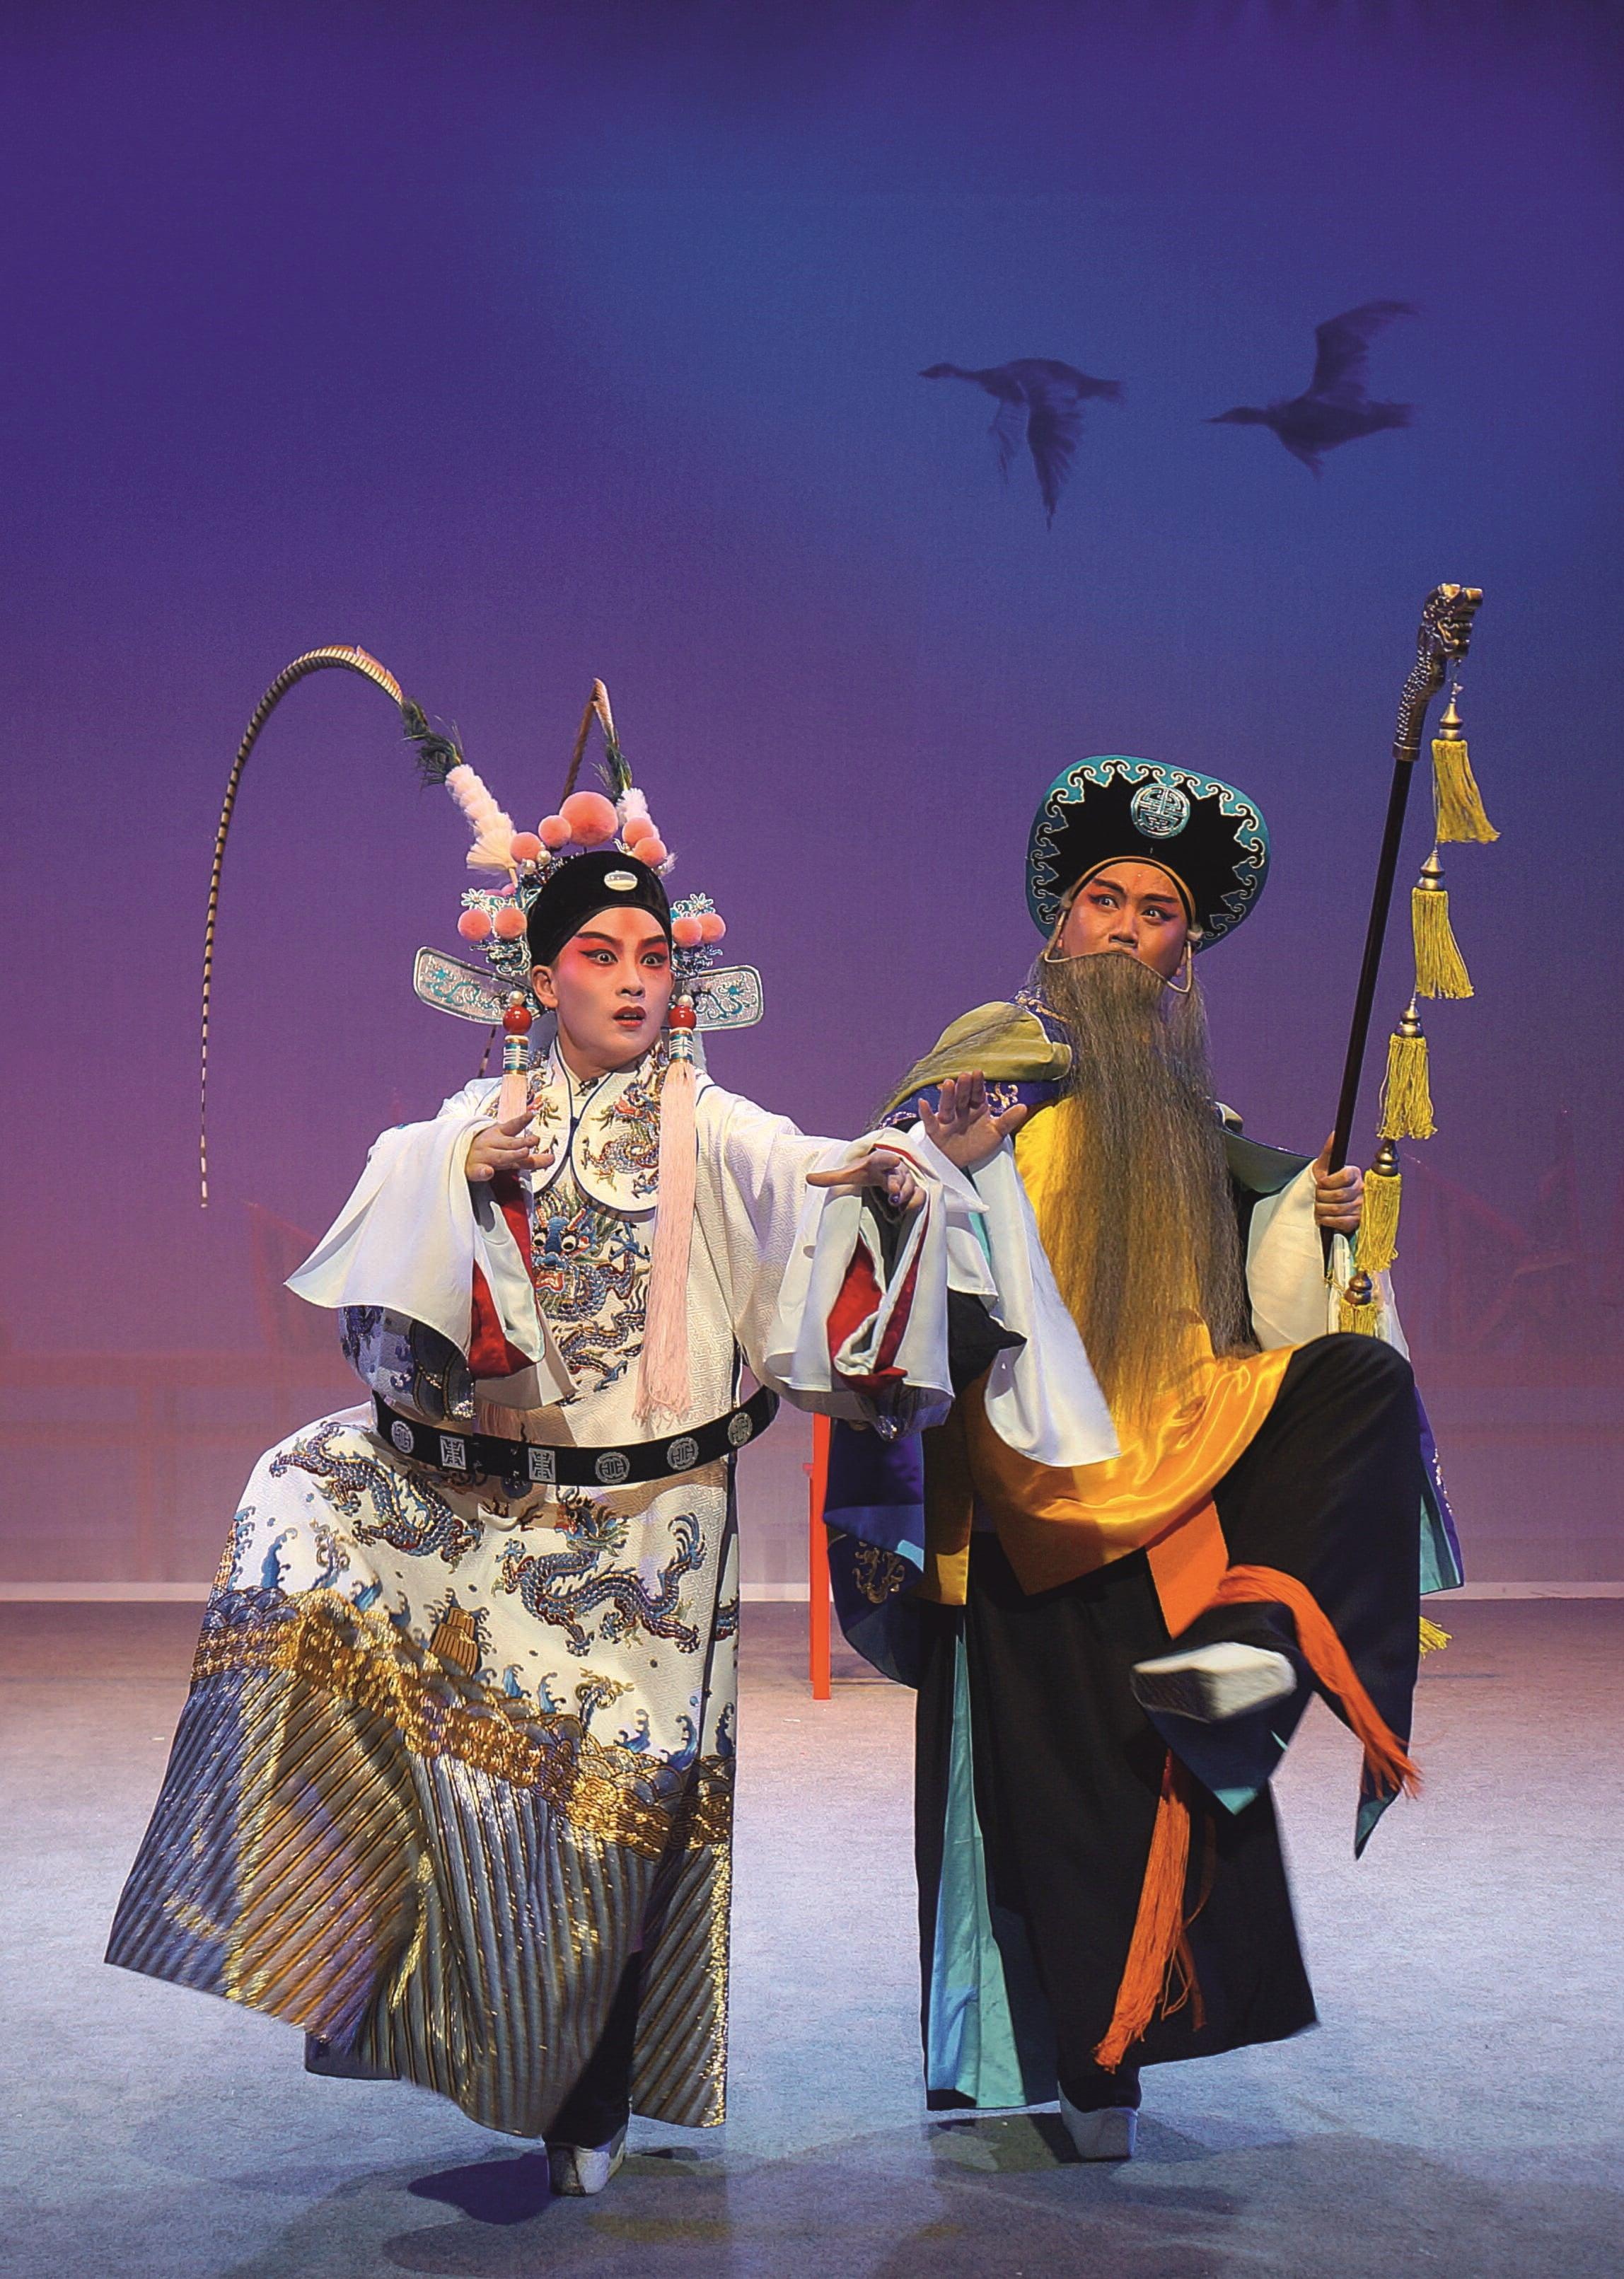 The inaugural Chinese Culture Festival will stage three classic Northern Kunqu opera plays in July. Photo shows a scene from the performance "Looking Homeward" from "Su Wu Herding Sheep".